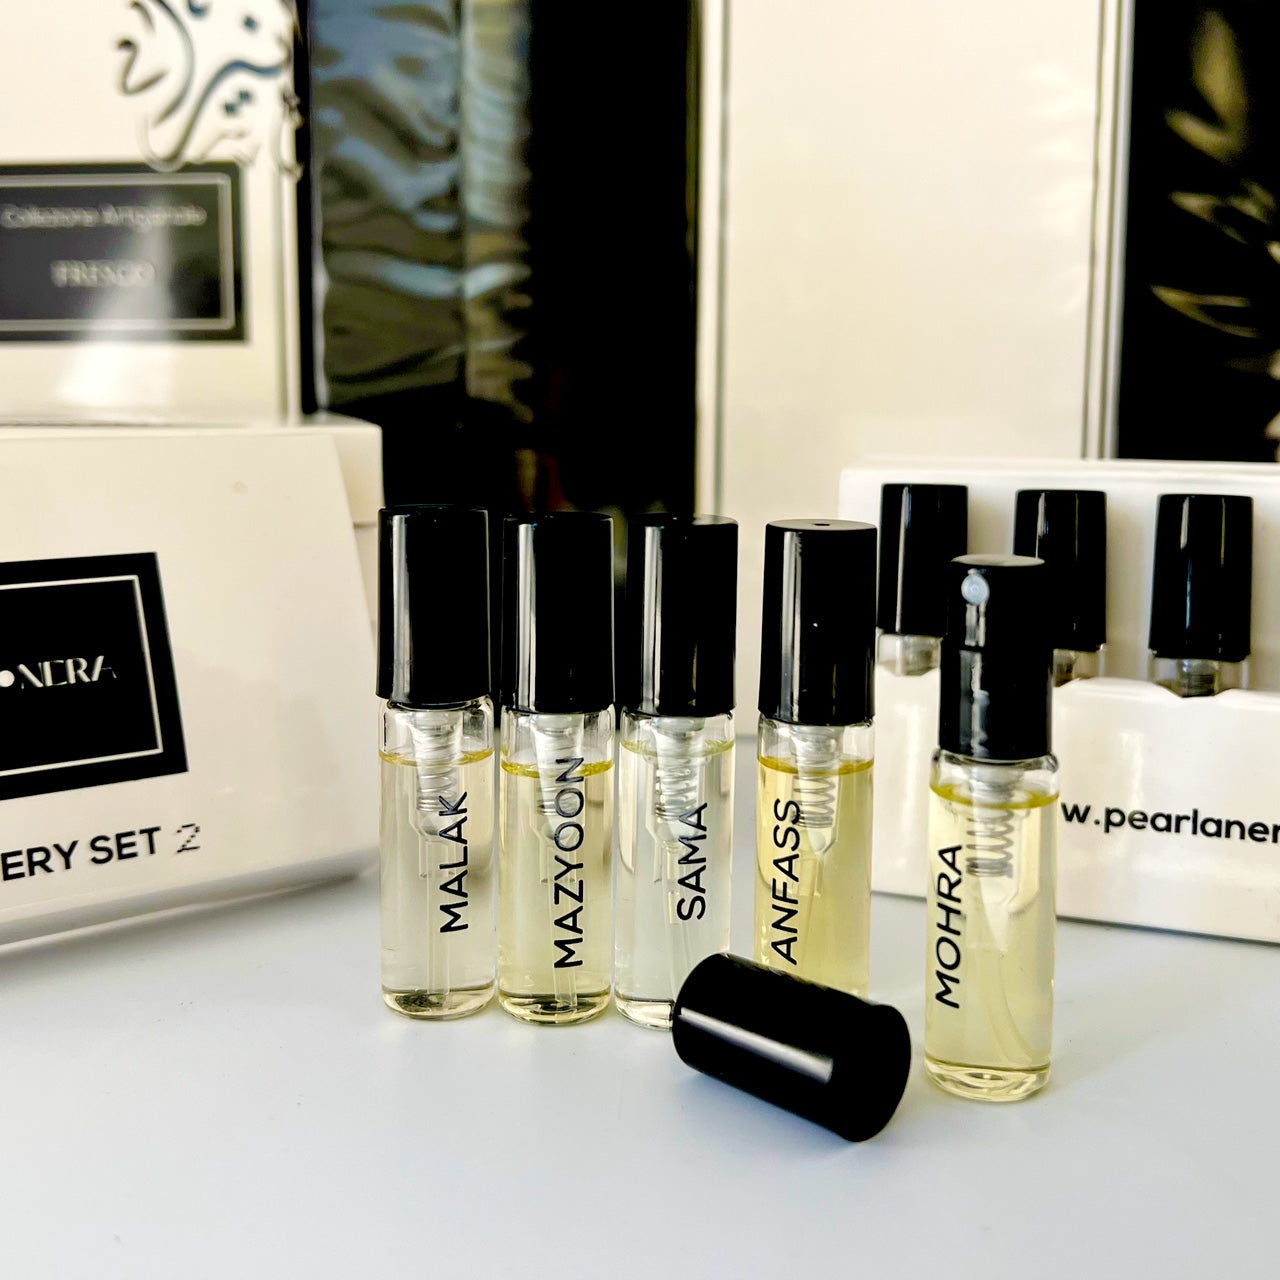 Whether you enjoy a musky scent, something citrusy, or a classic floral note, these fragrance sets are sure to indulge your senses.